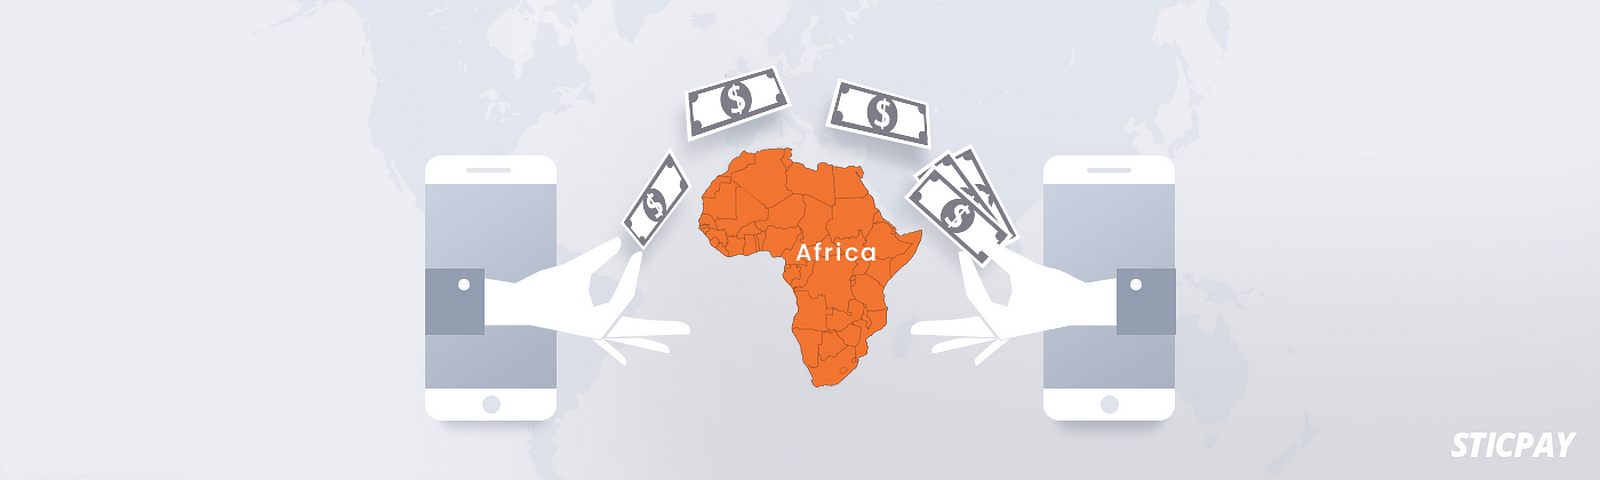 International money transfer policy: an overview of Africa regions (series 2. Egypt)